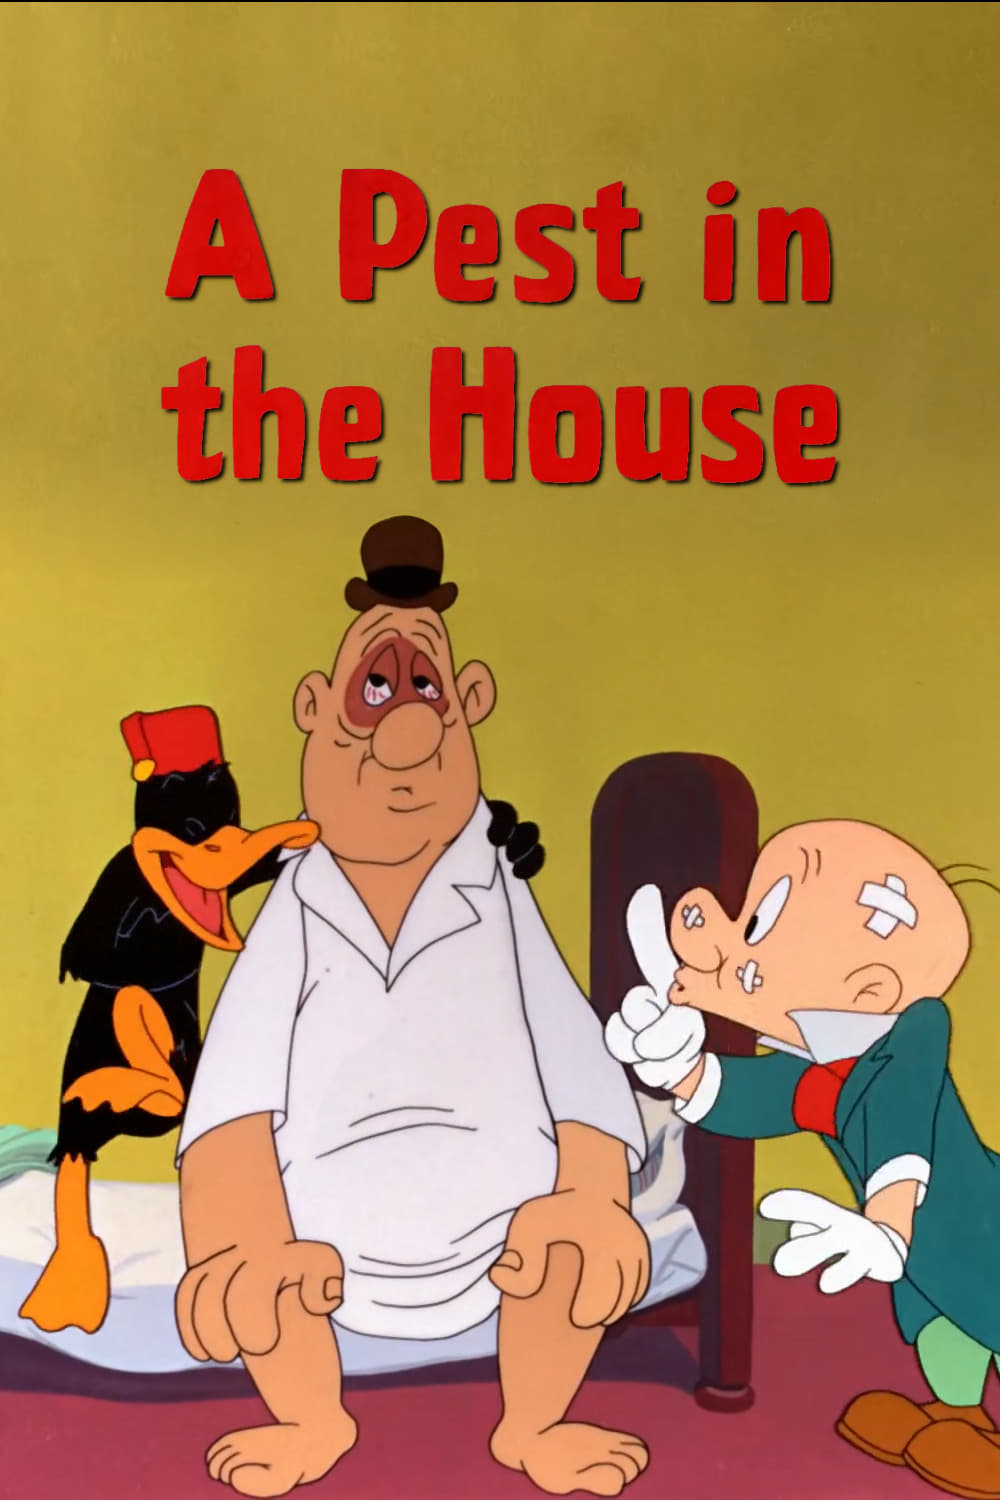 A Pest in the House (1947)